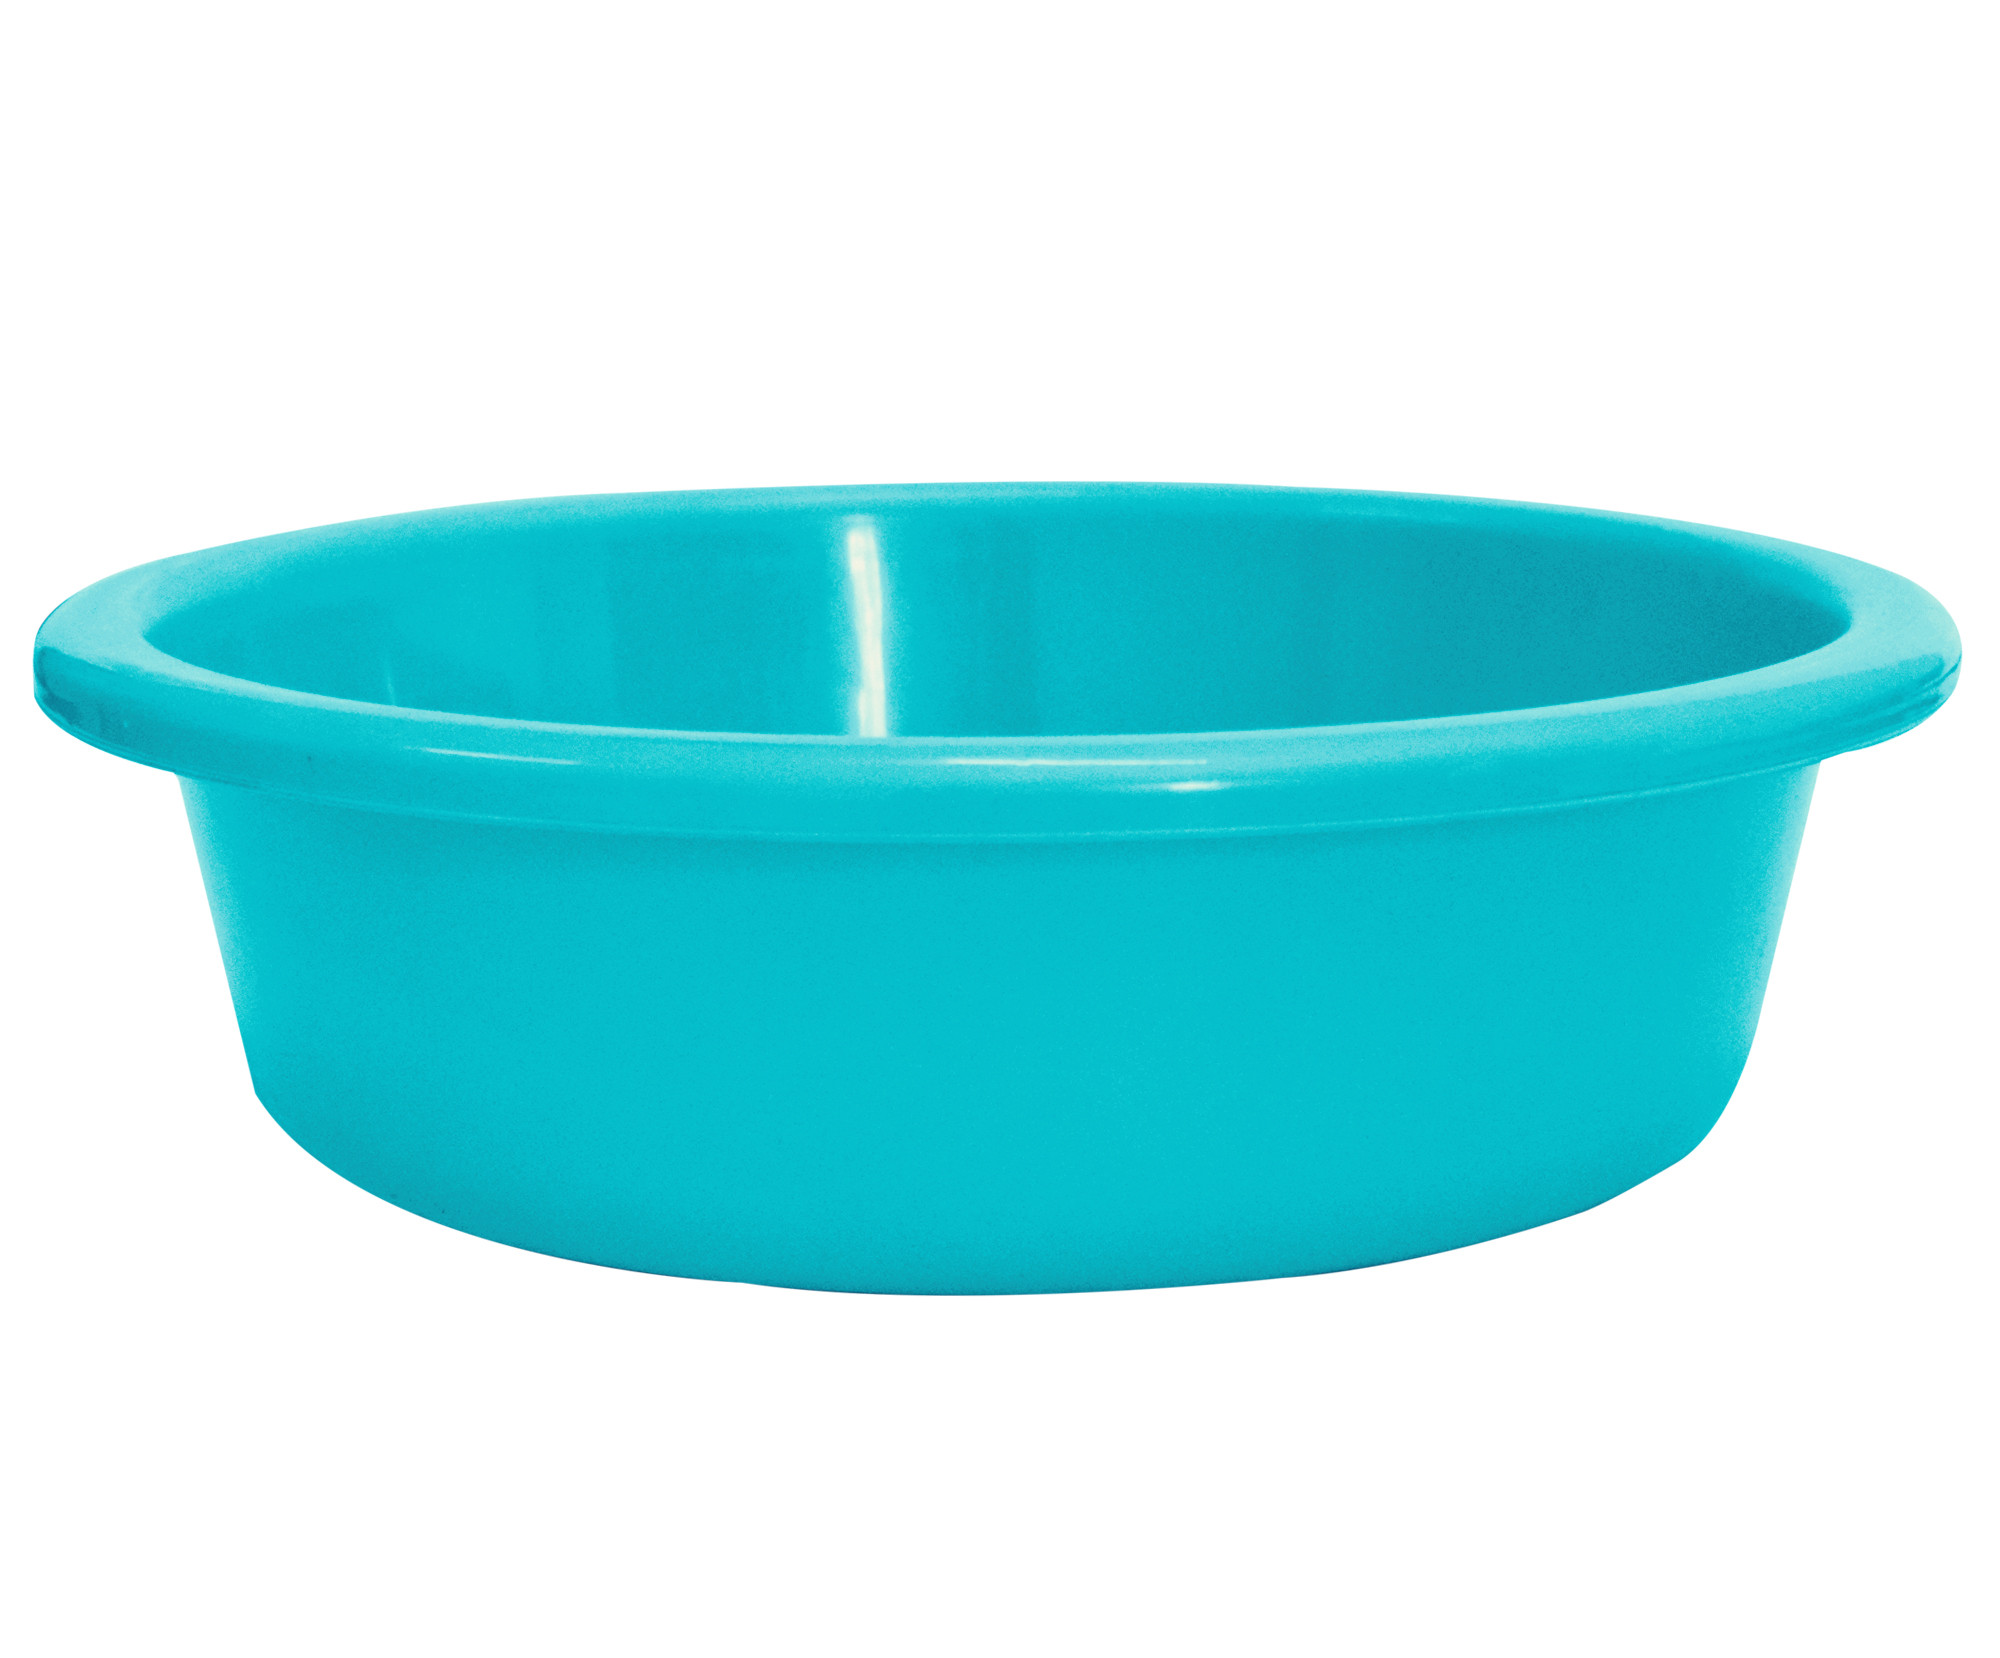 Kuber Industries Multiuses Unbreakable Plastic Knead Dough Basket/Basin Bowl For Home & Kitchen 6 Ltr- Pack of 2 (Sky Blue & Blue)